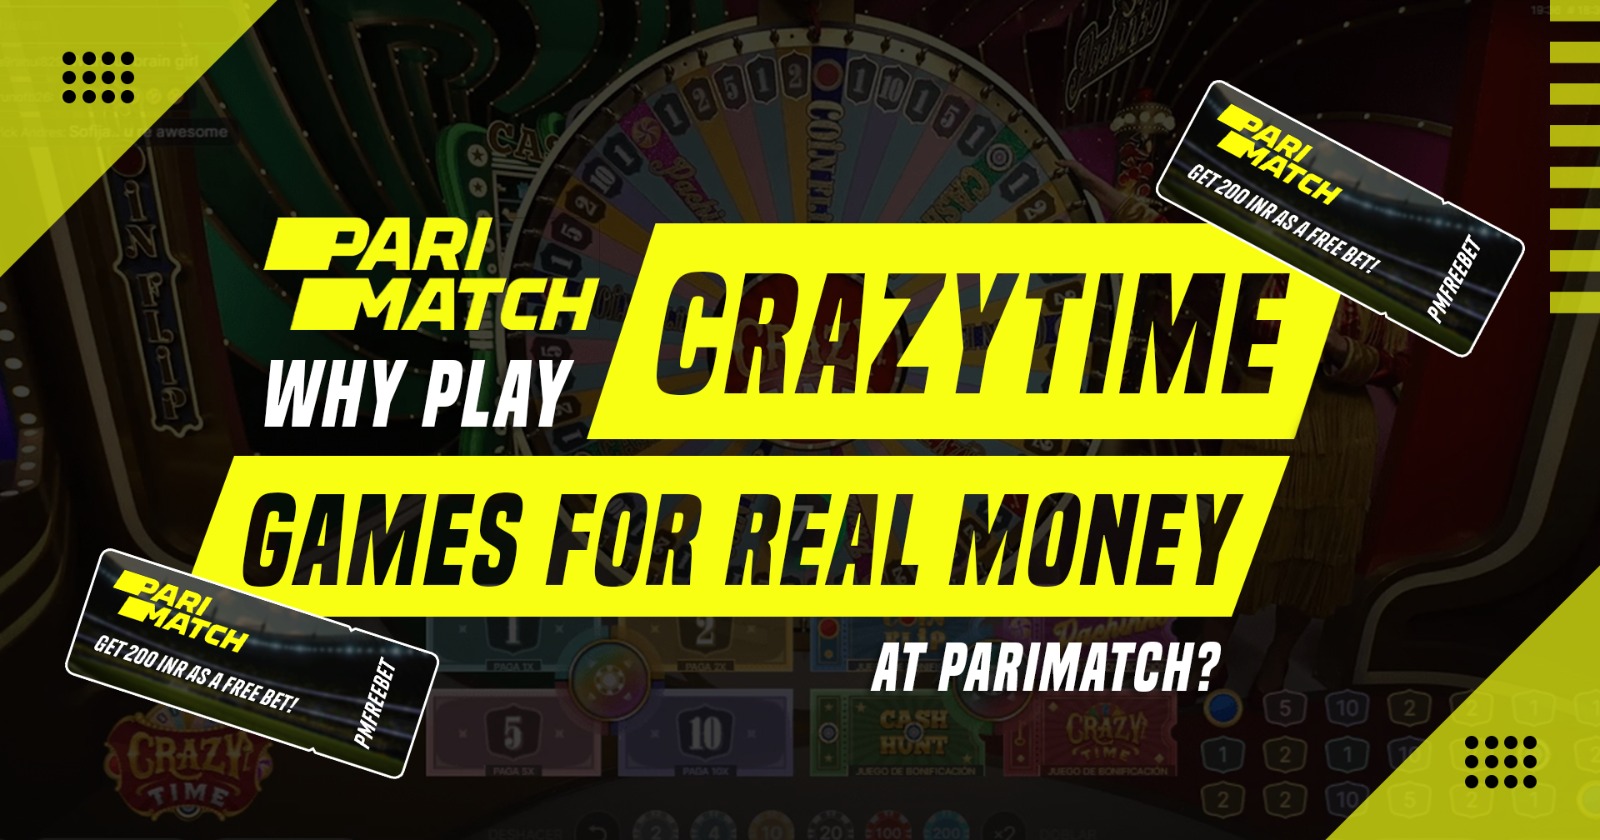 Why Play Crazy Time Games for Real Money at Parimatch